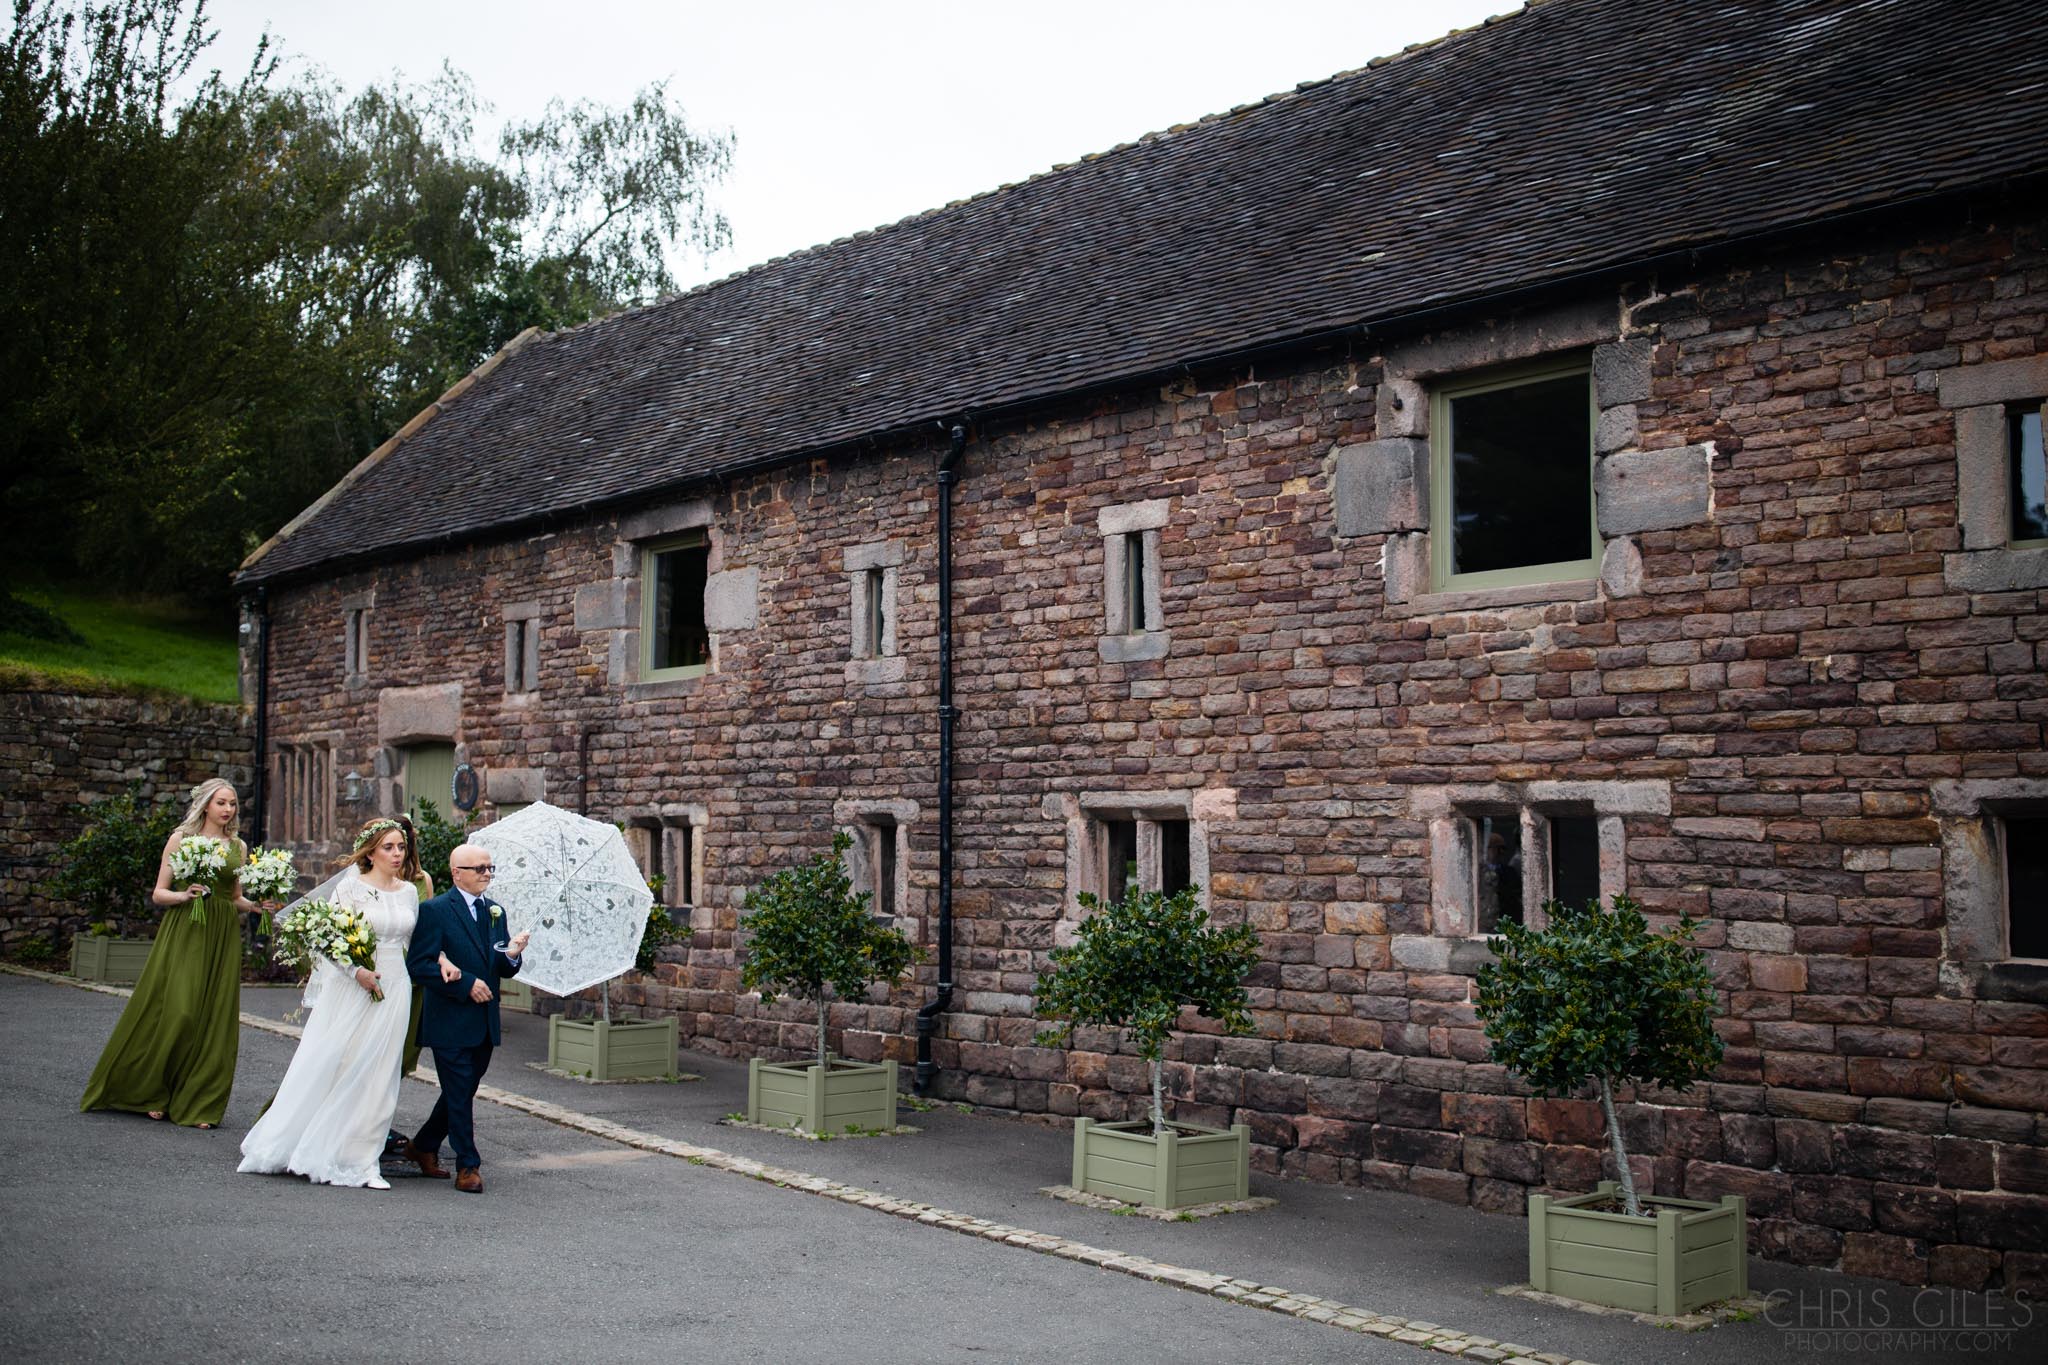 The stone buildings at The Ashes Barn